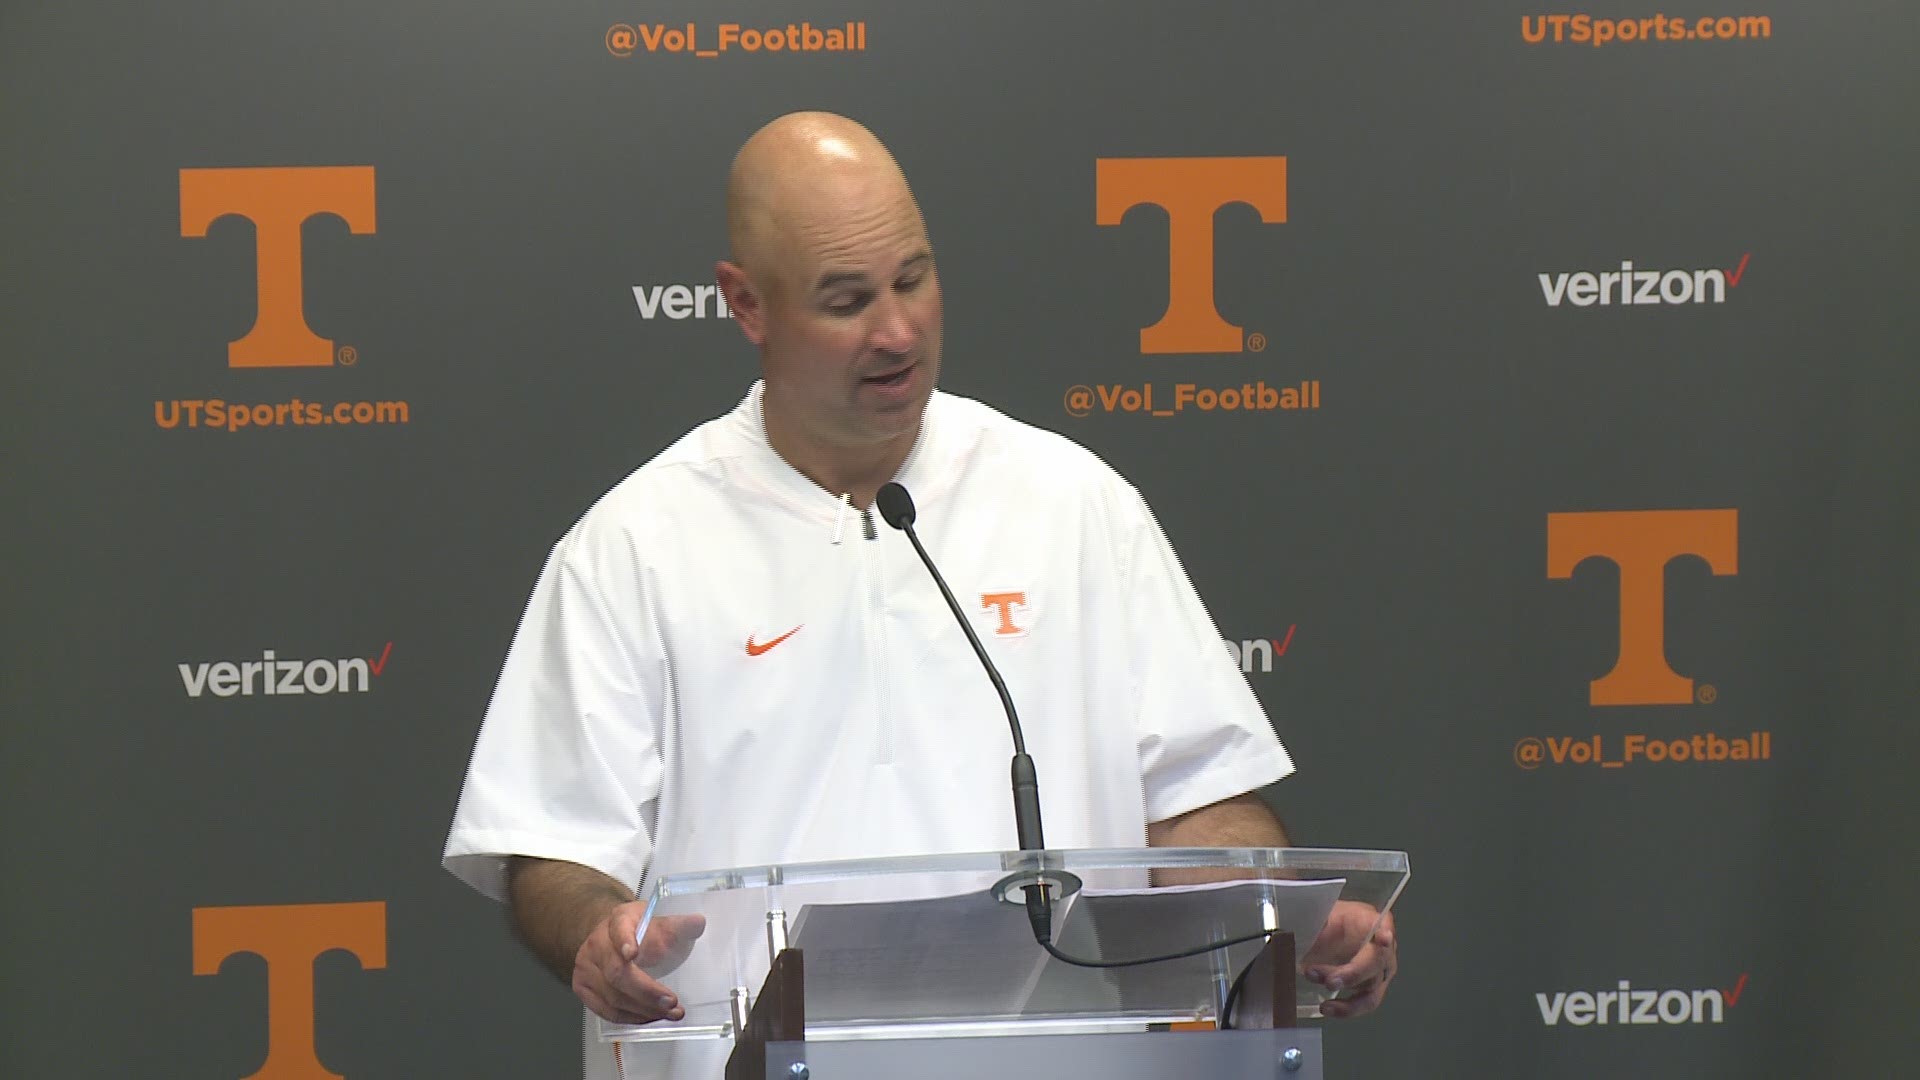 "I would hope we're ready. If you come to Tennessee, you came to play in the SEC."